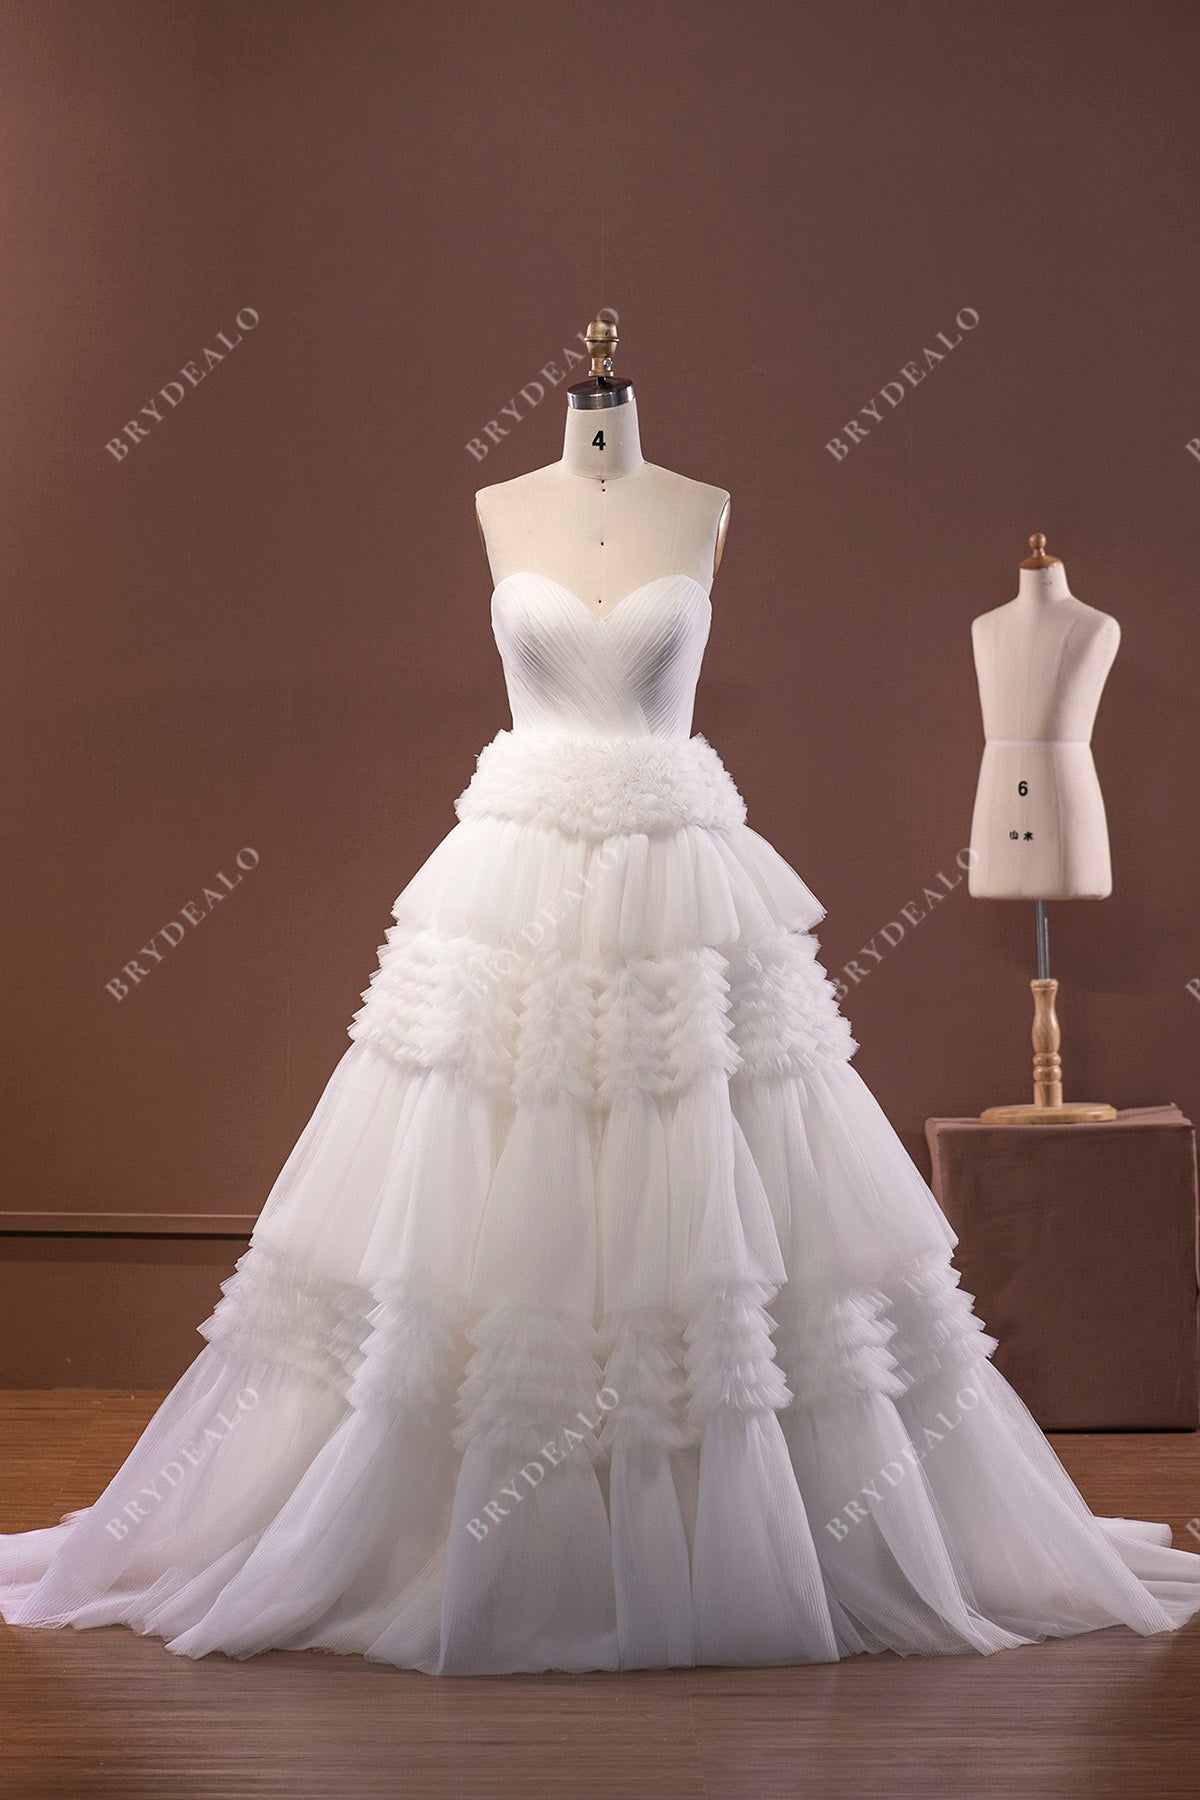 Strapless Sweetheart Pleated Cute Bridal Ball Gown - Xdressy